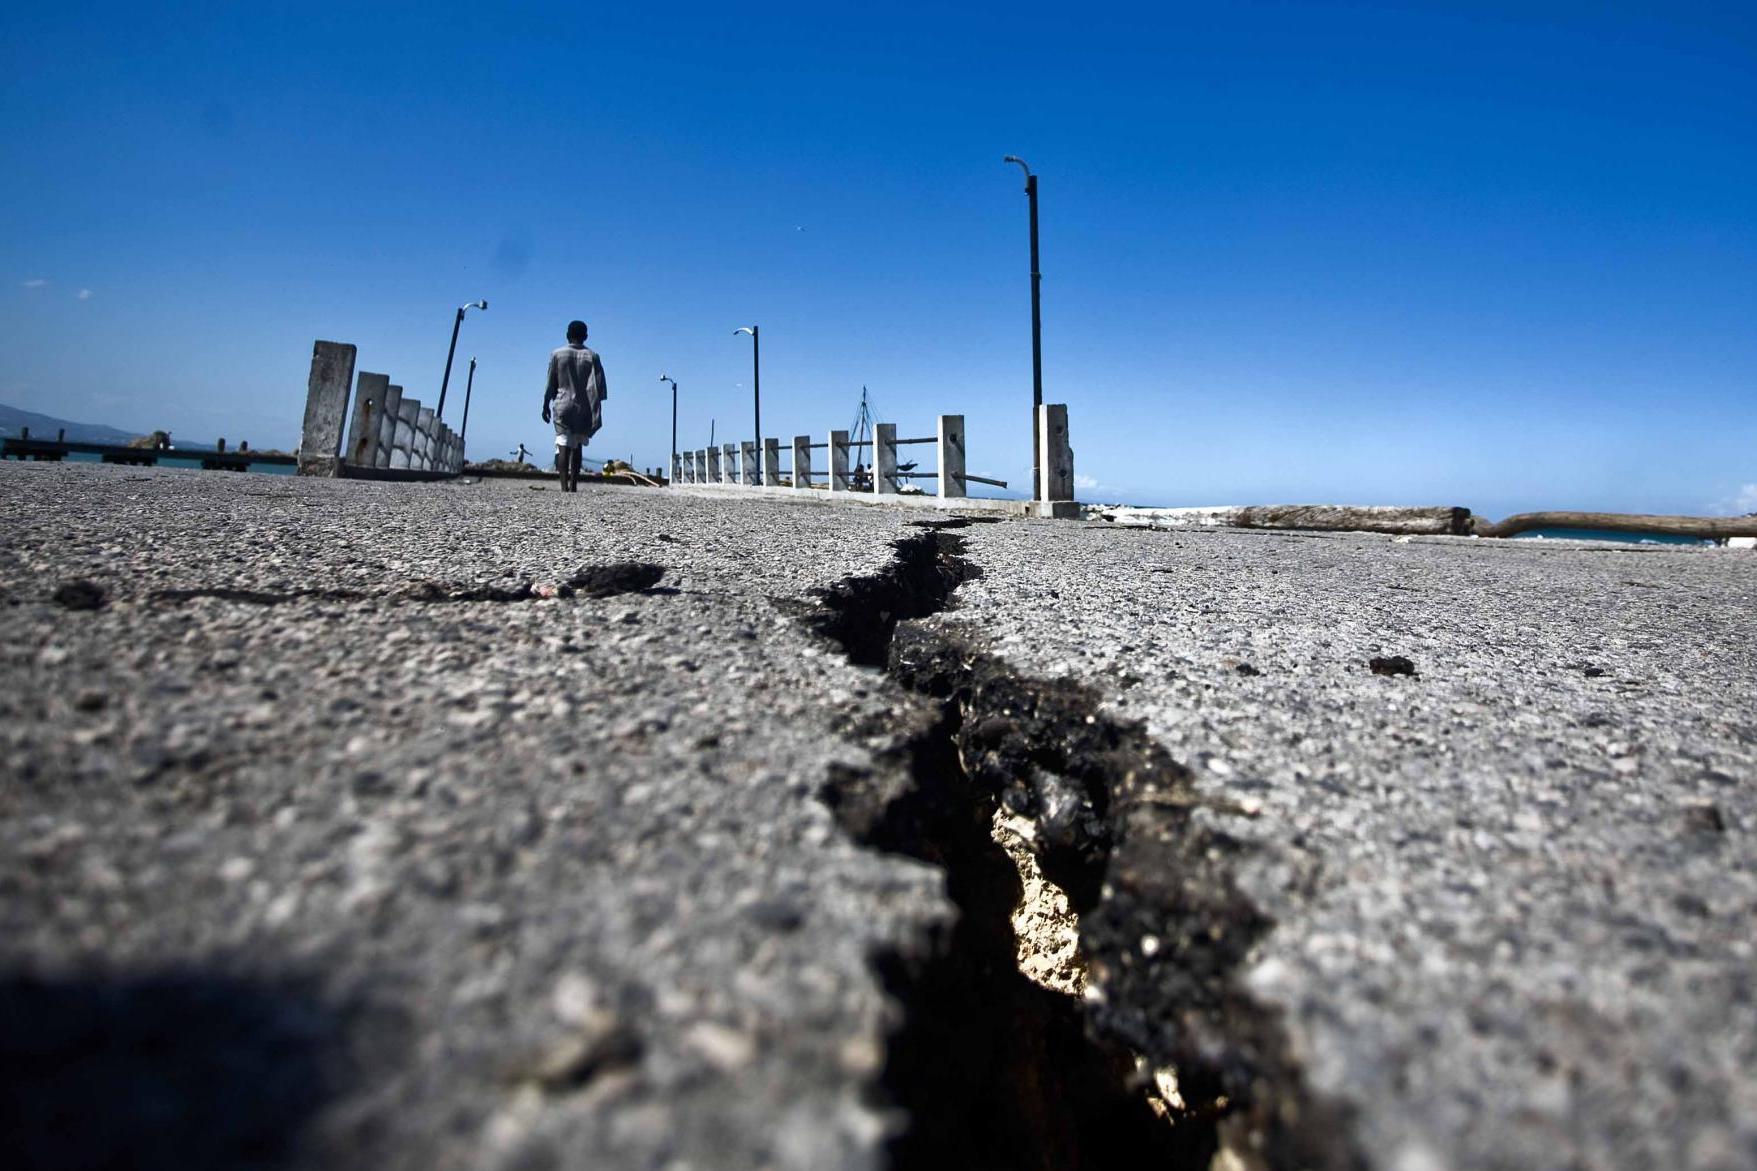 Cracks in the street after an earthquake in Haiti in 2010